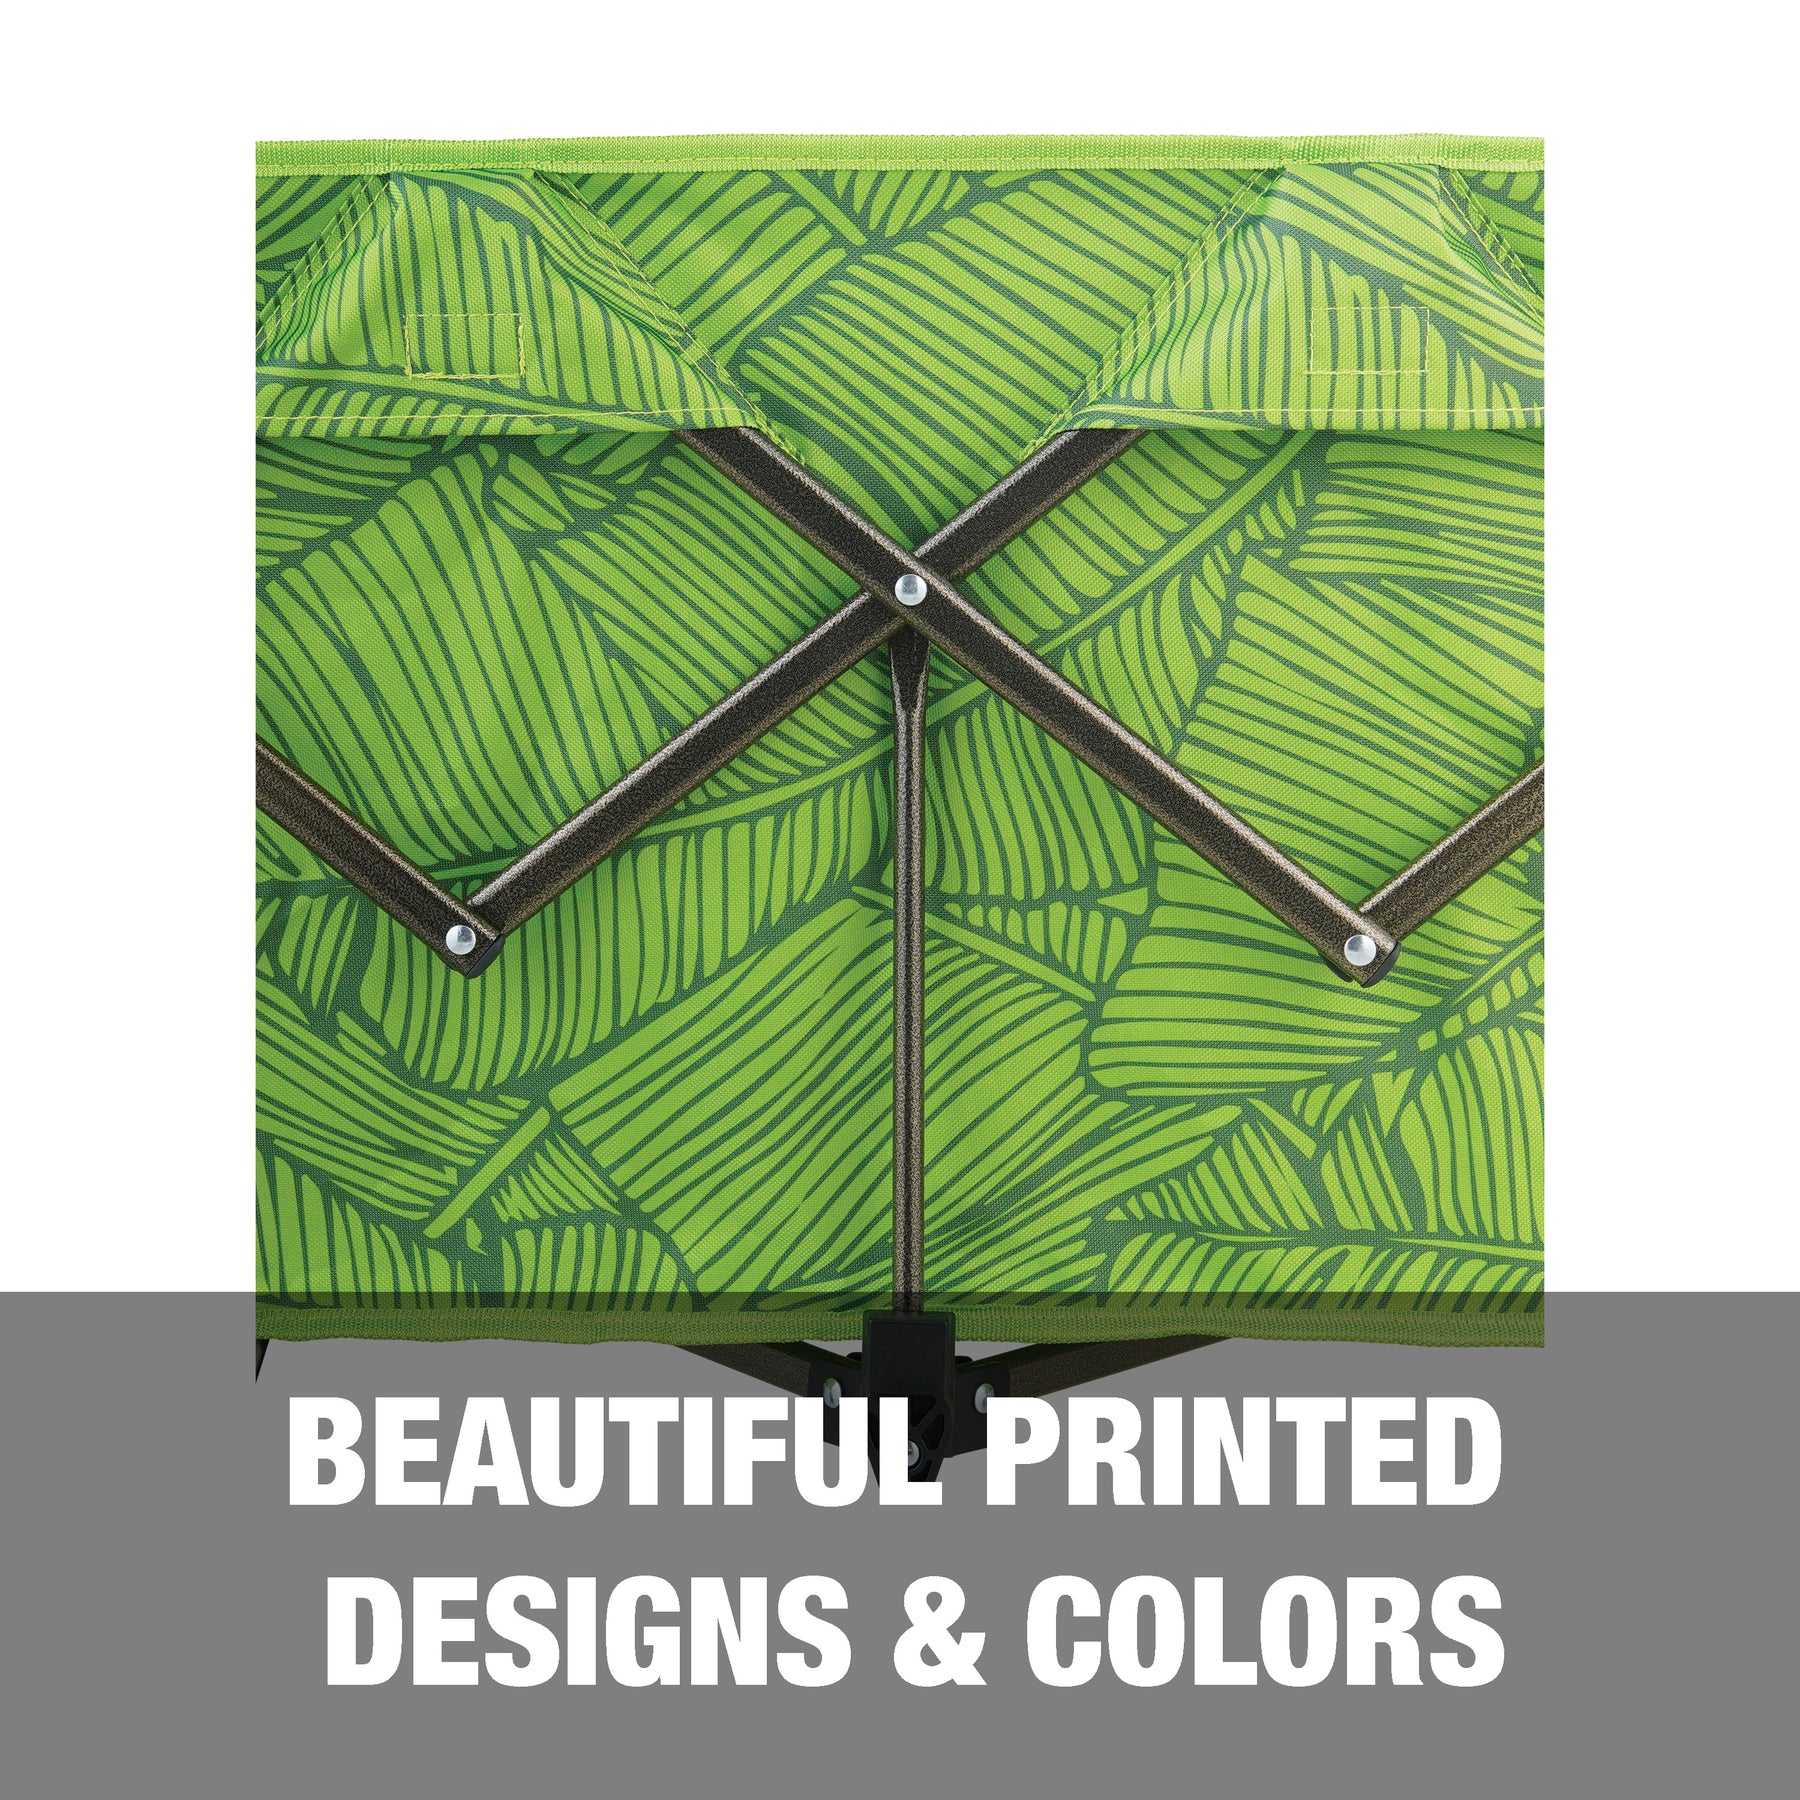 Has beautiful printed designs and colors.